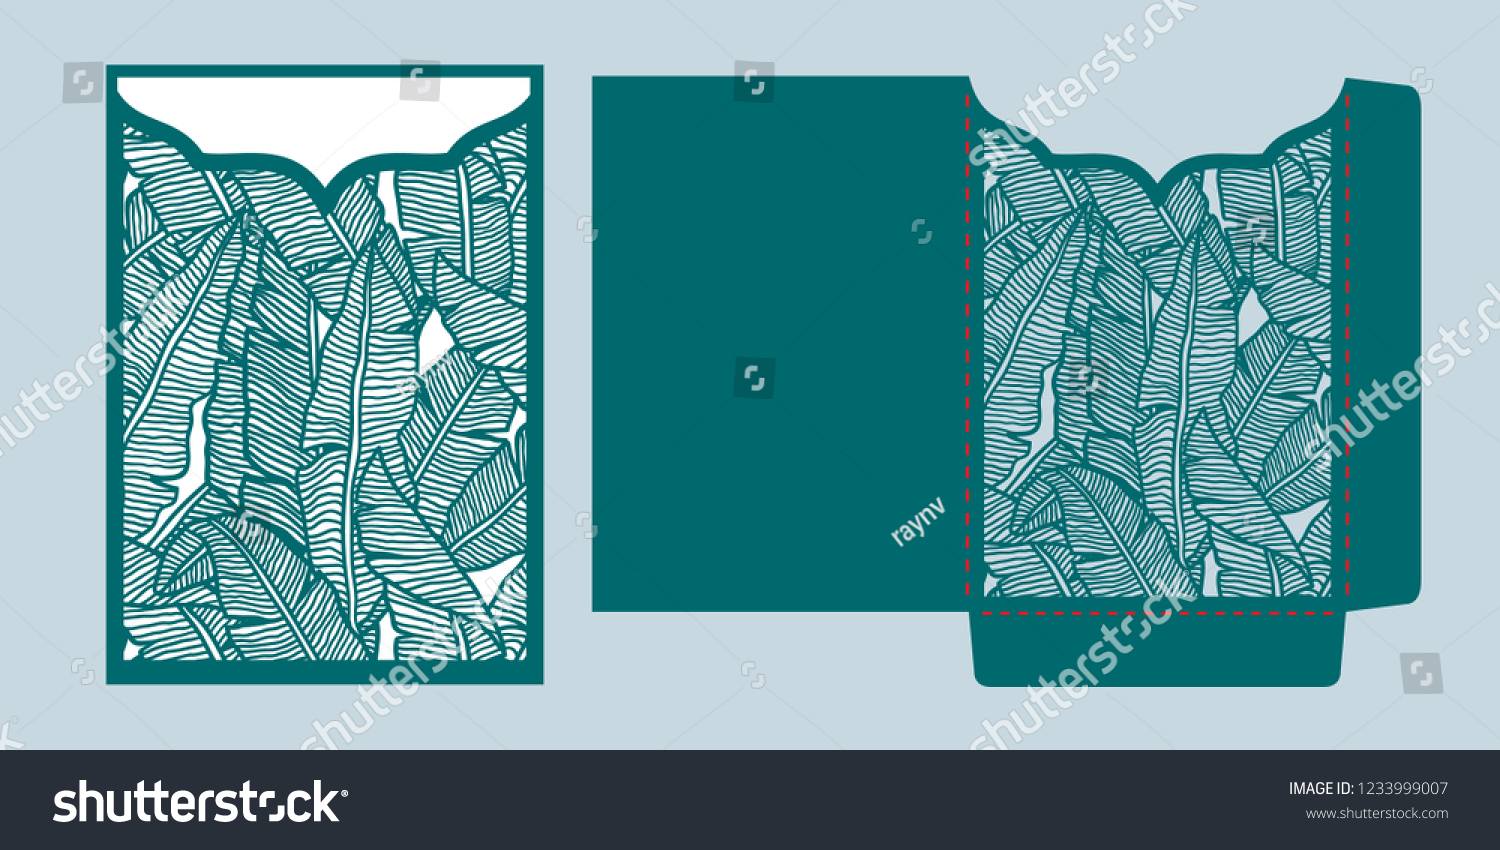 SVG of Laser cut wedding invitation pocket envelope template vector. Die cut paper card with tropical pattern of banana leaves. Greeting card or invitation cover template for cutting in tropical style. svg